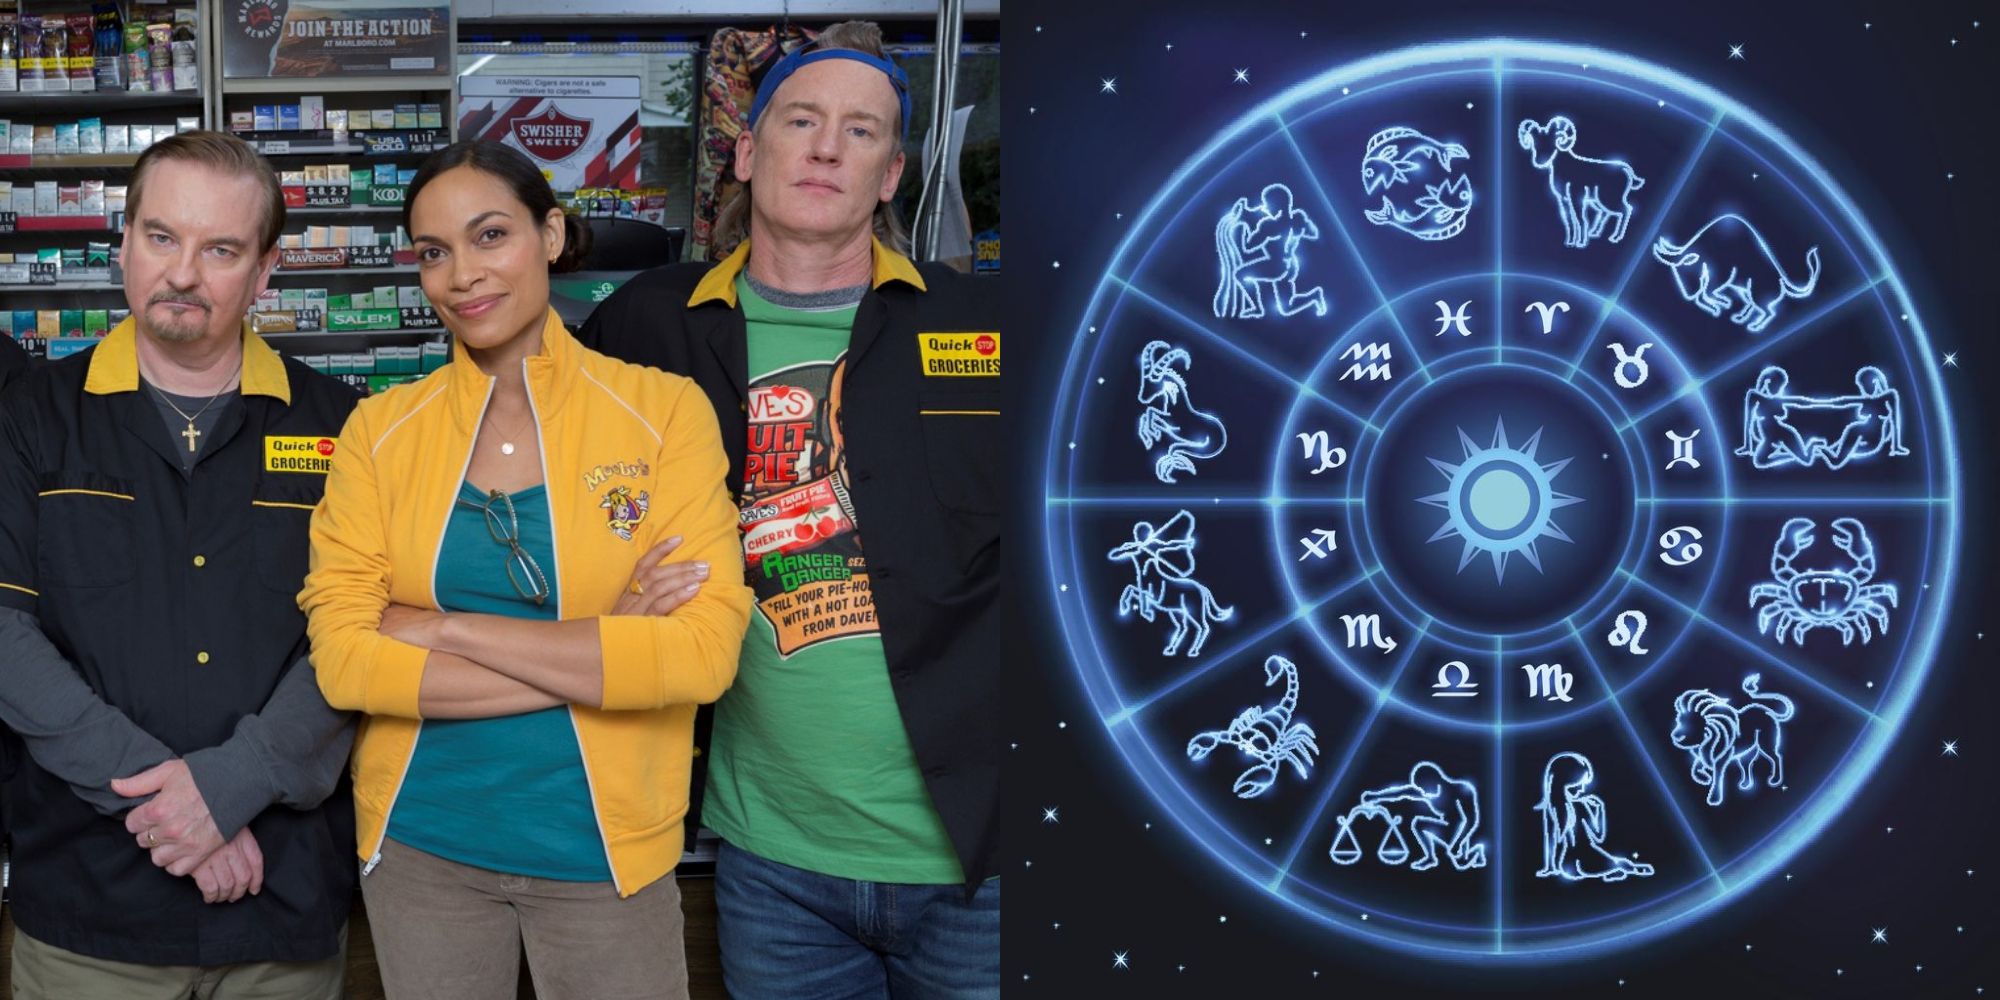 Split image showing the main characters from Clerks 3 and a zodiac wheel.